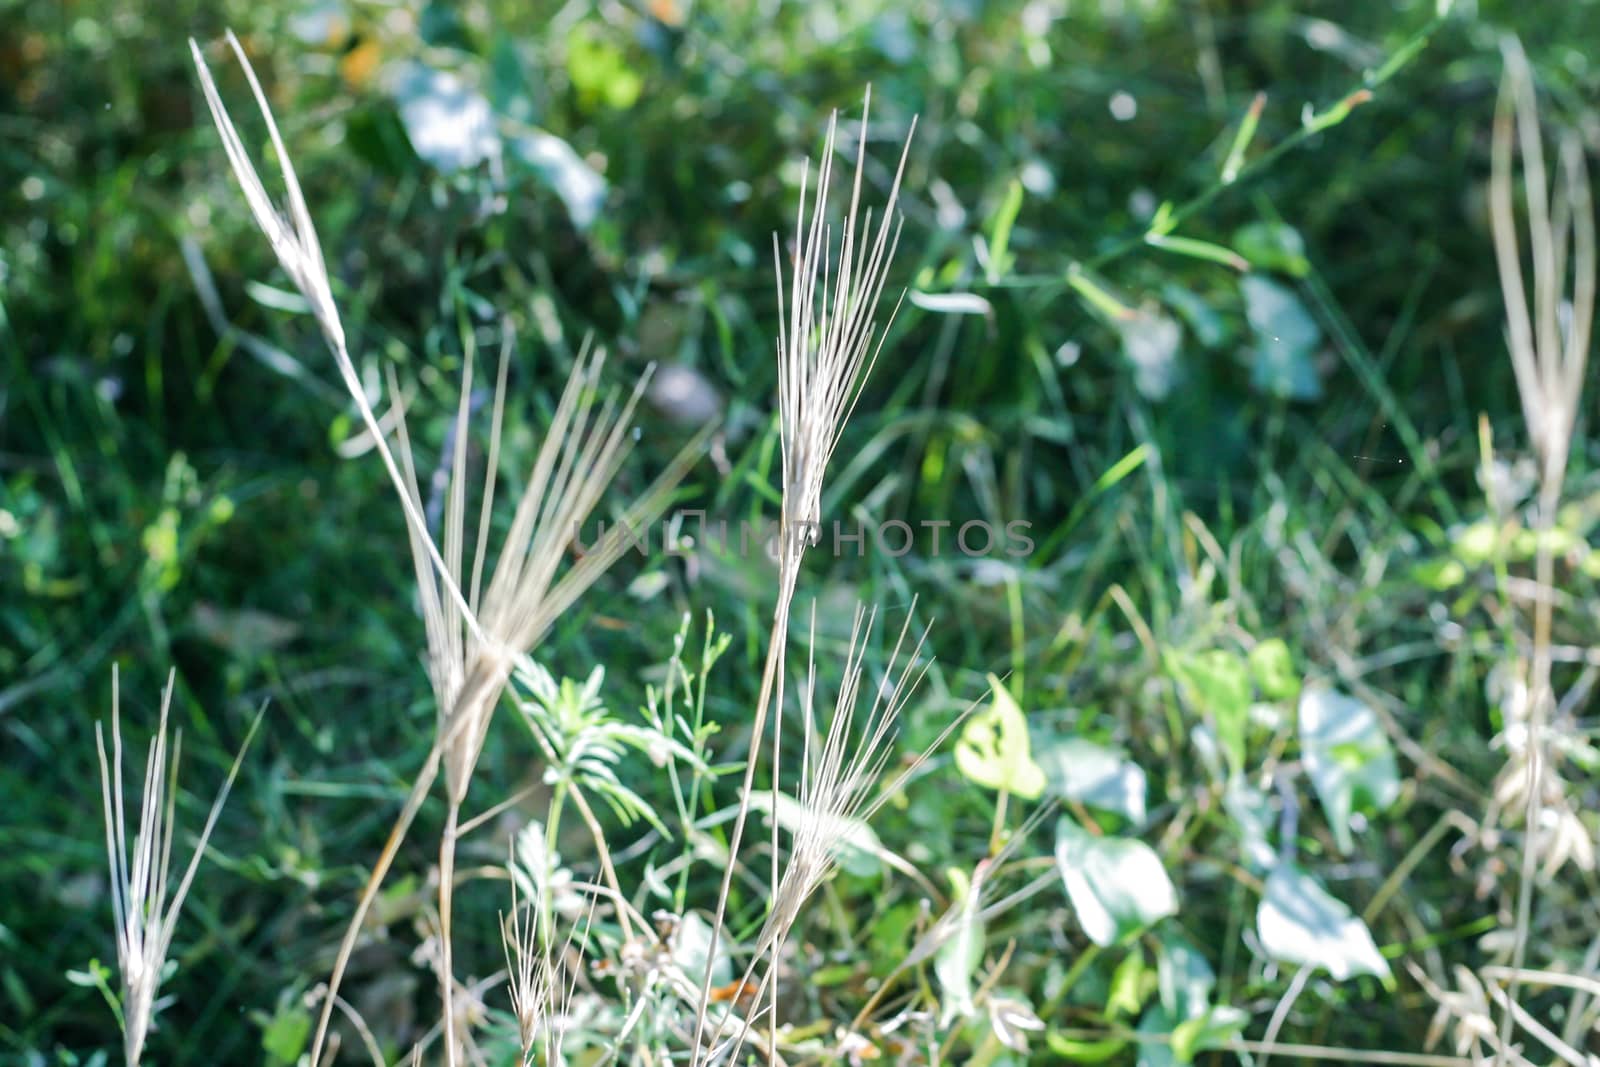 Forest meadow with some spikelet growing among the grass